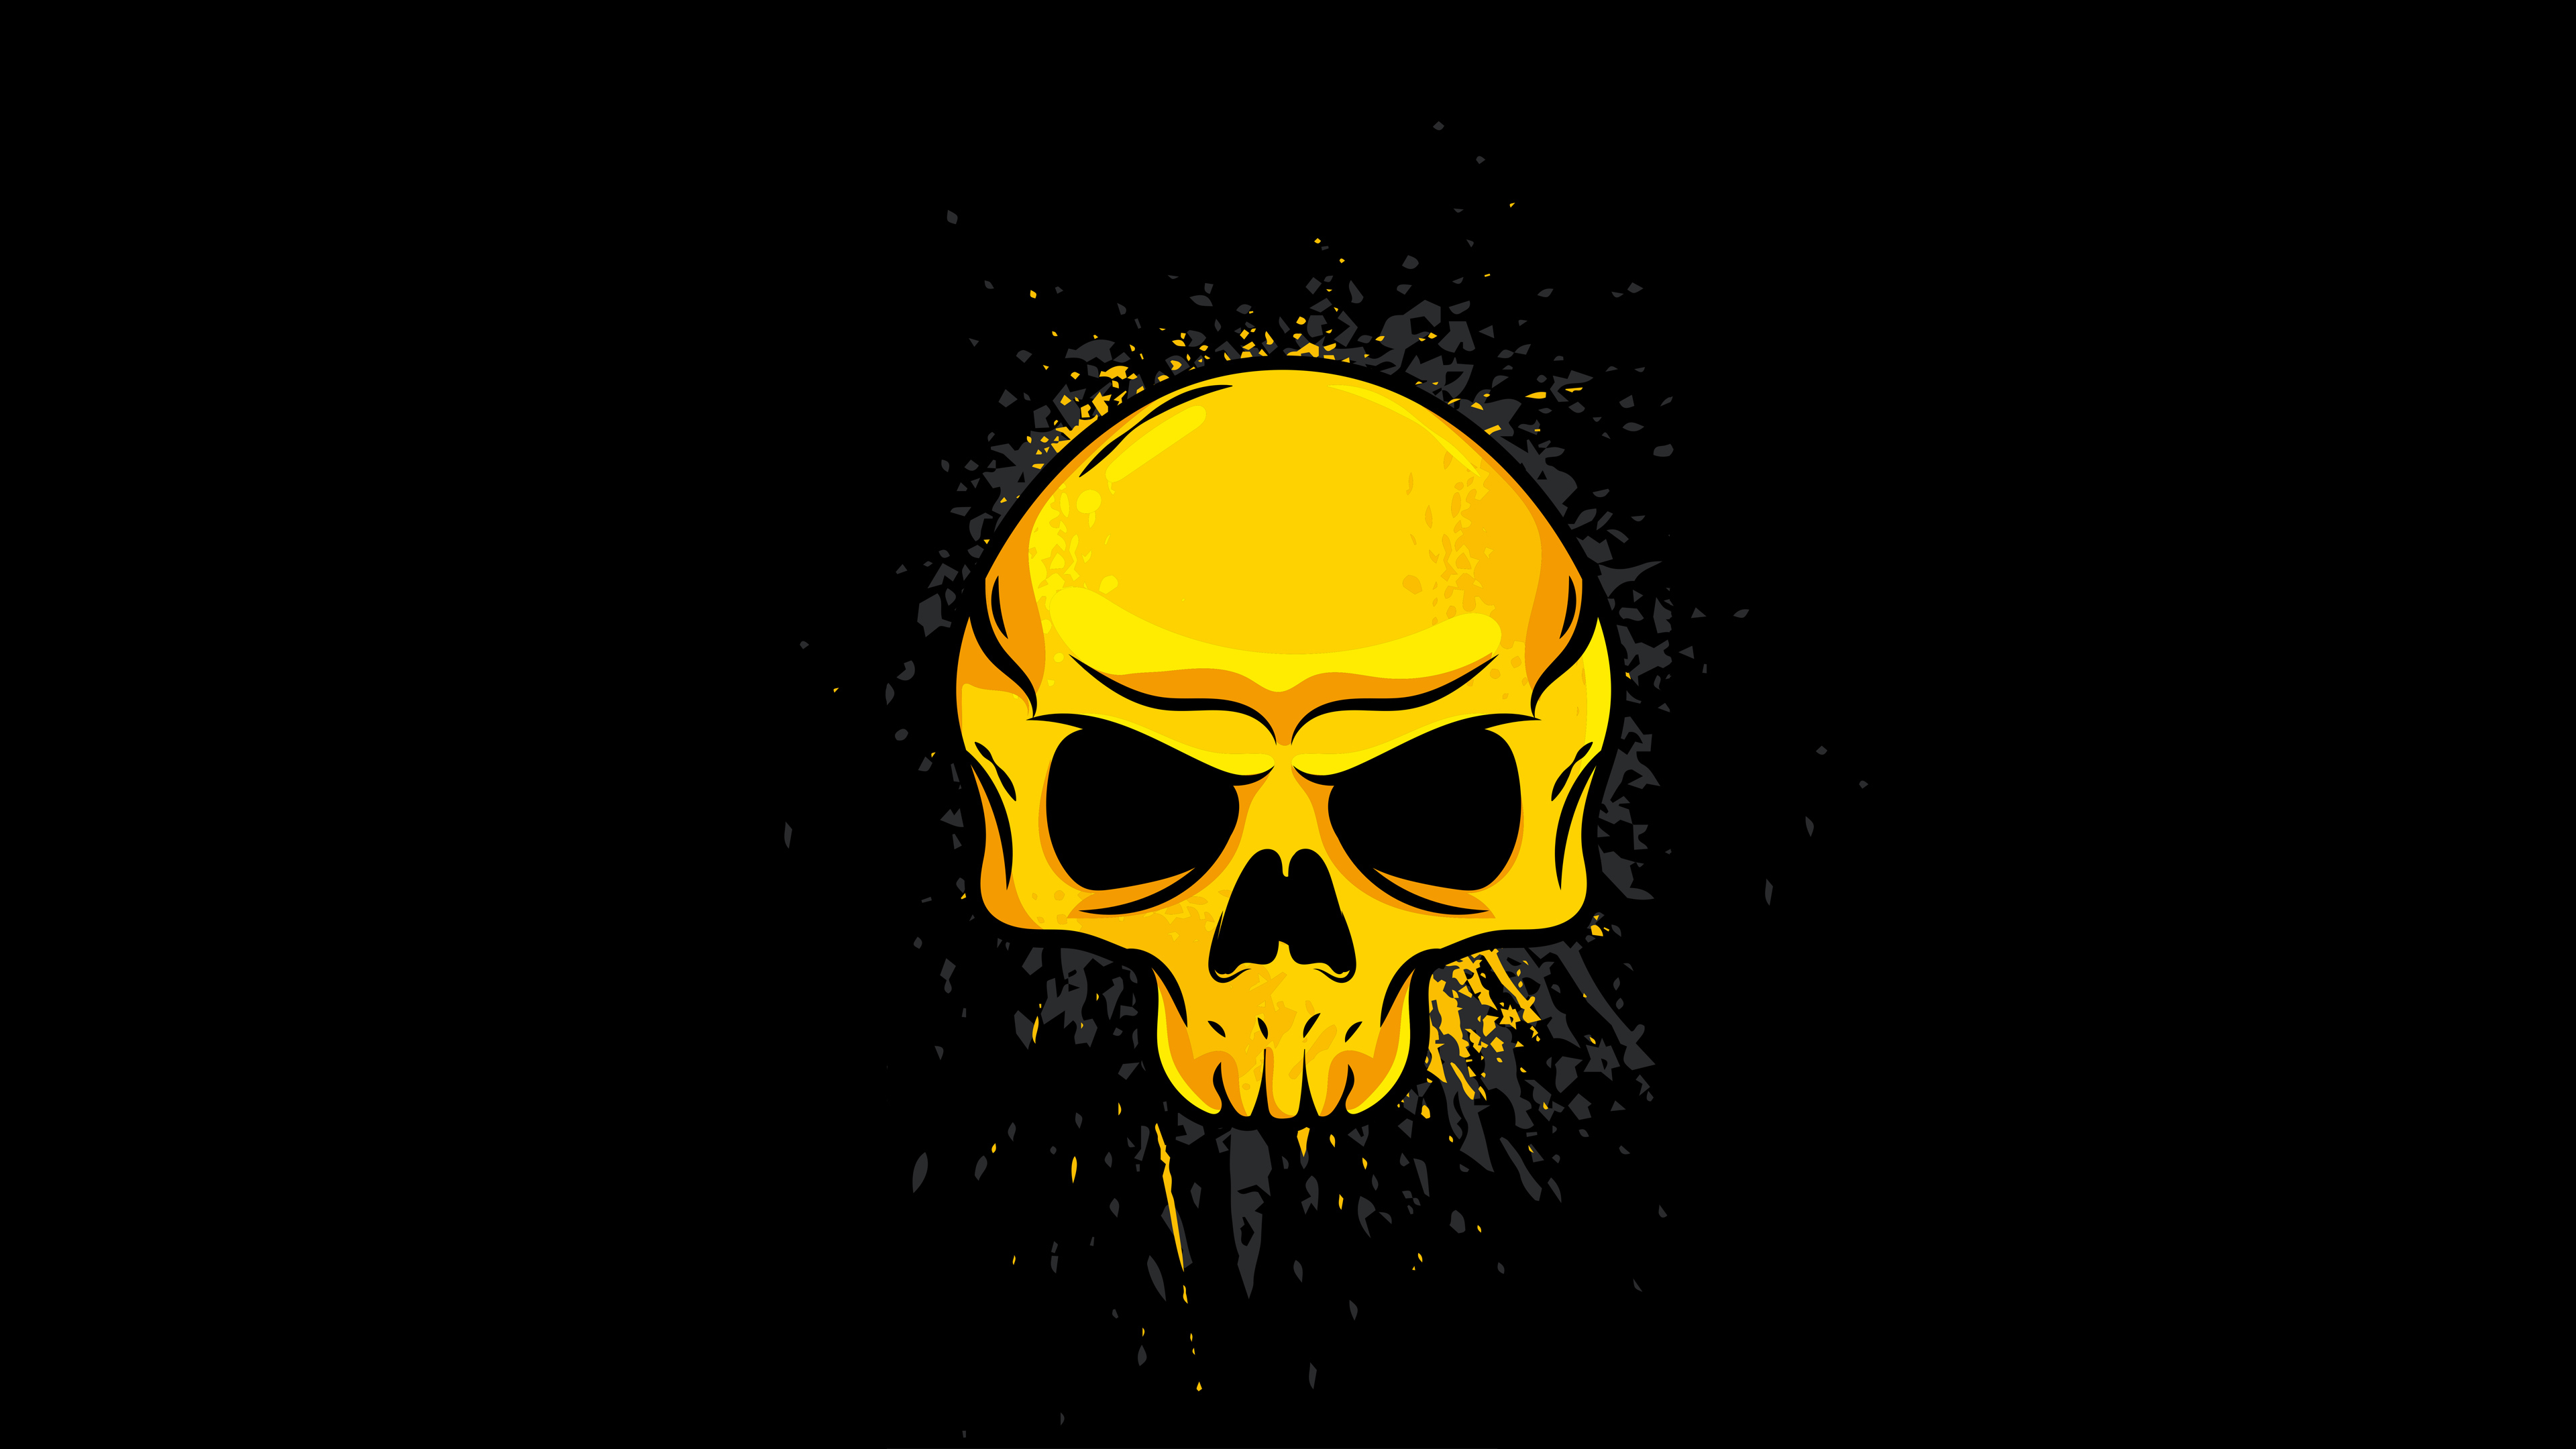 1600x900 4k Gold Skull 1600x900 Resolution Wallpaper Hd Artist 4k Wallpapers Images Photos And Background